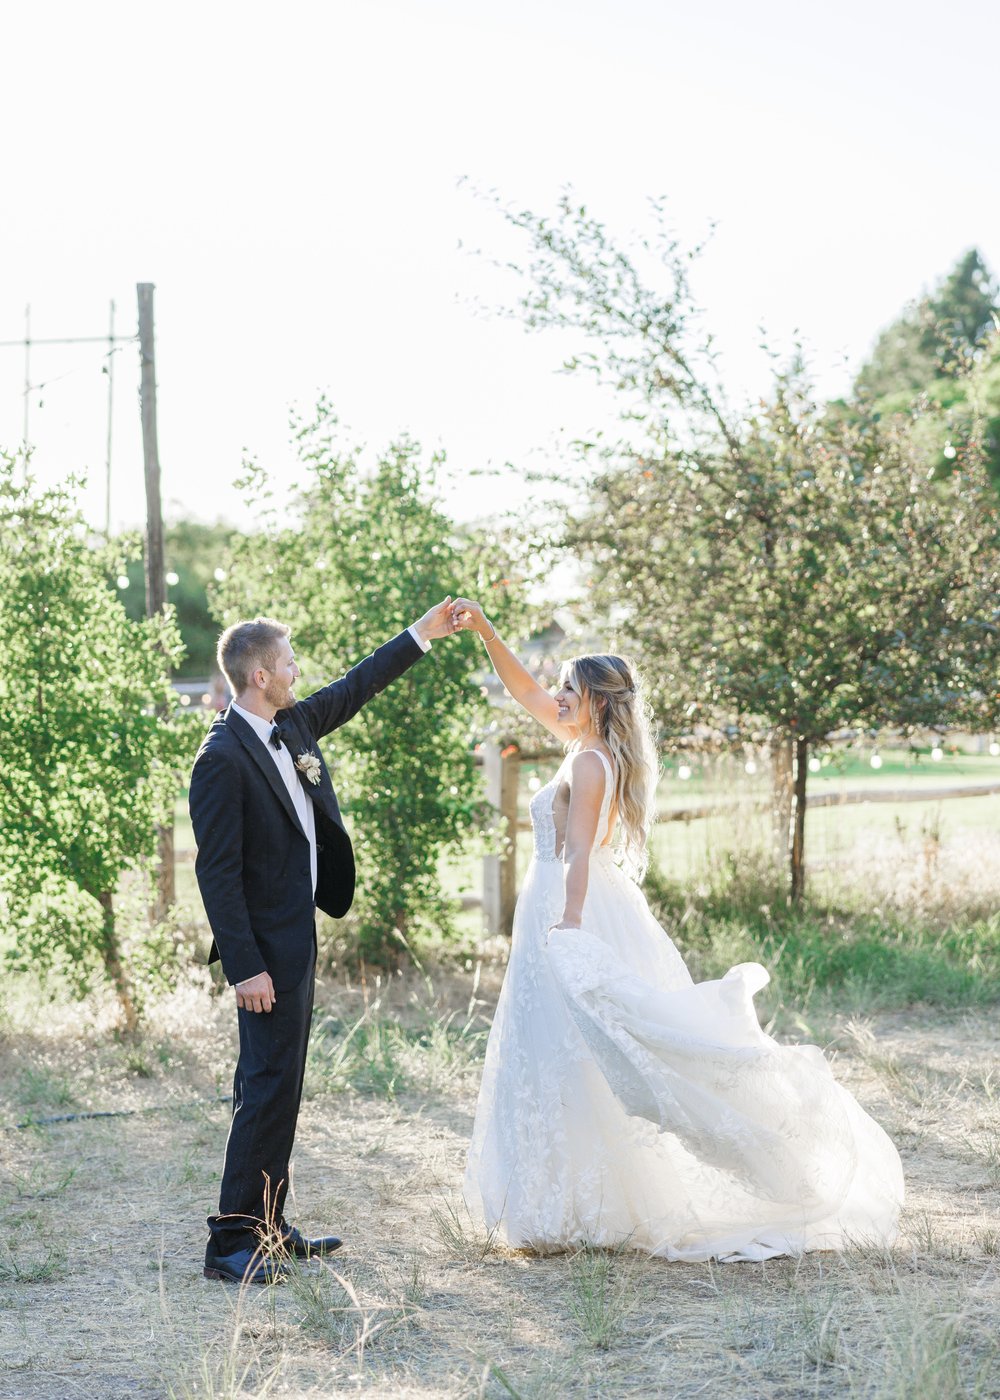  Newlyweds dance at Quiet Meadow Farms in Mapleton captured by High-end wedding photographer Savanna Richardson Photography. smalltown wedding #SavannaRichardsonPhotography #SavannaRichardsonWeddings #QuietMeadowFarms #MapletonUTweddingphotographers 